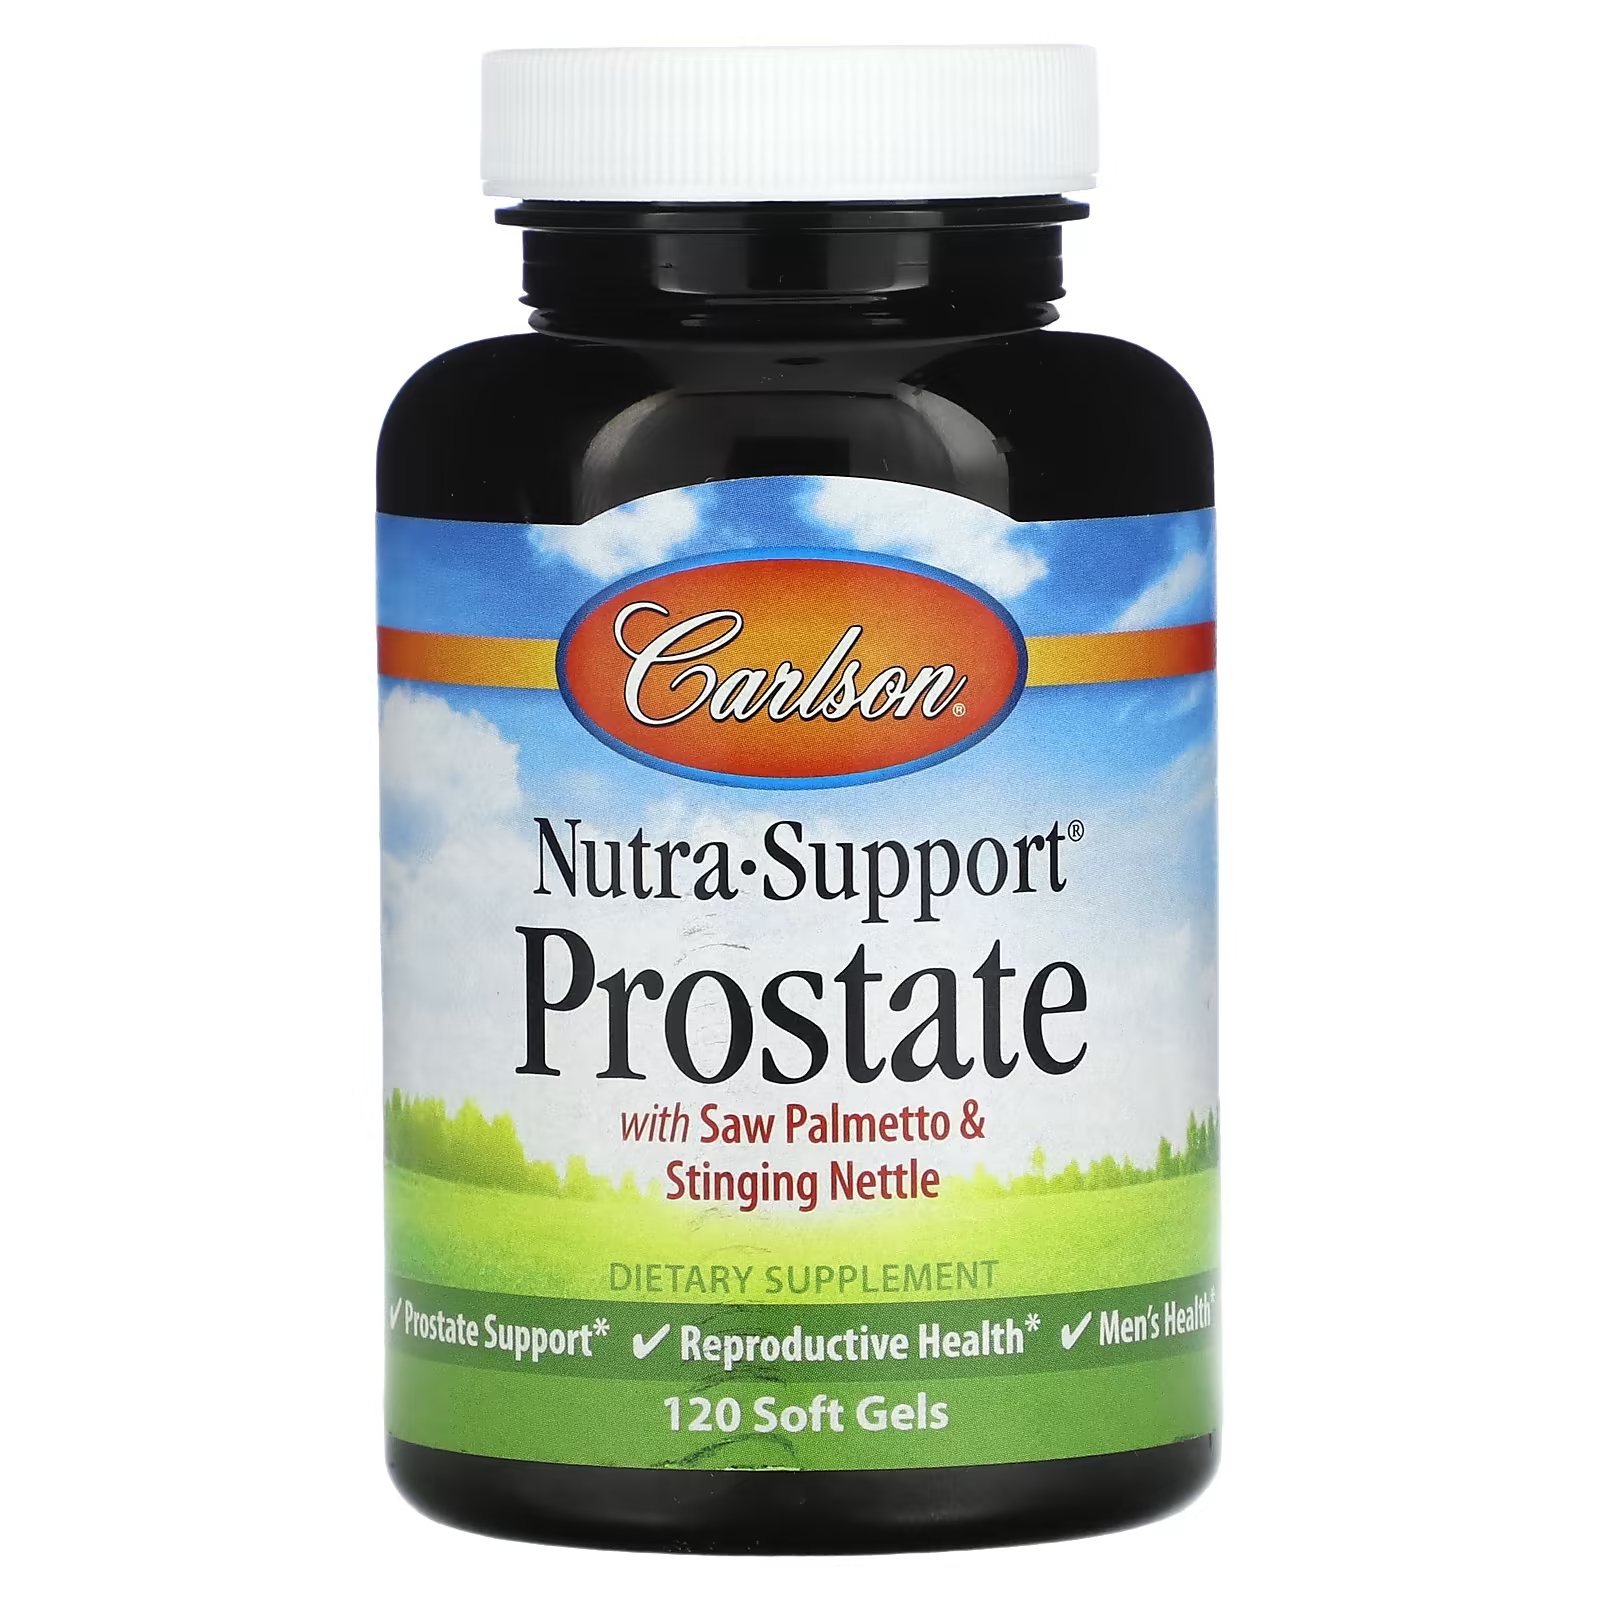 carlson nutra support prostate 60 мягких таблеток Carlson Nutra-Support Prostate 120 мягких гелей